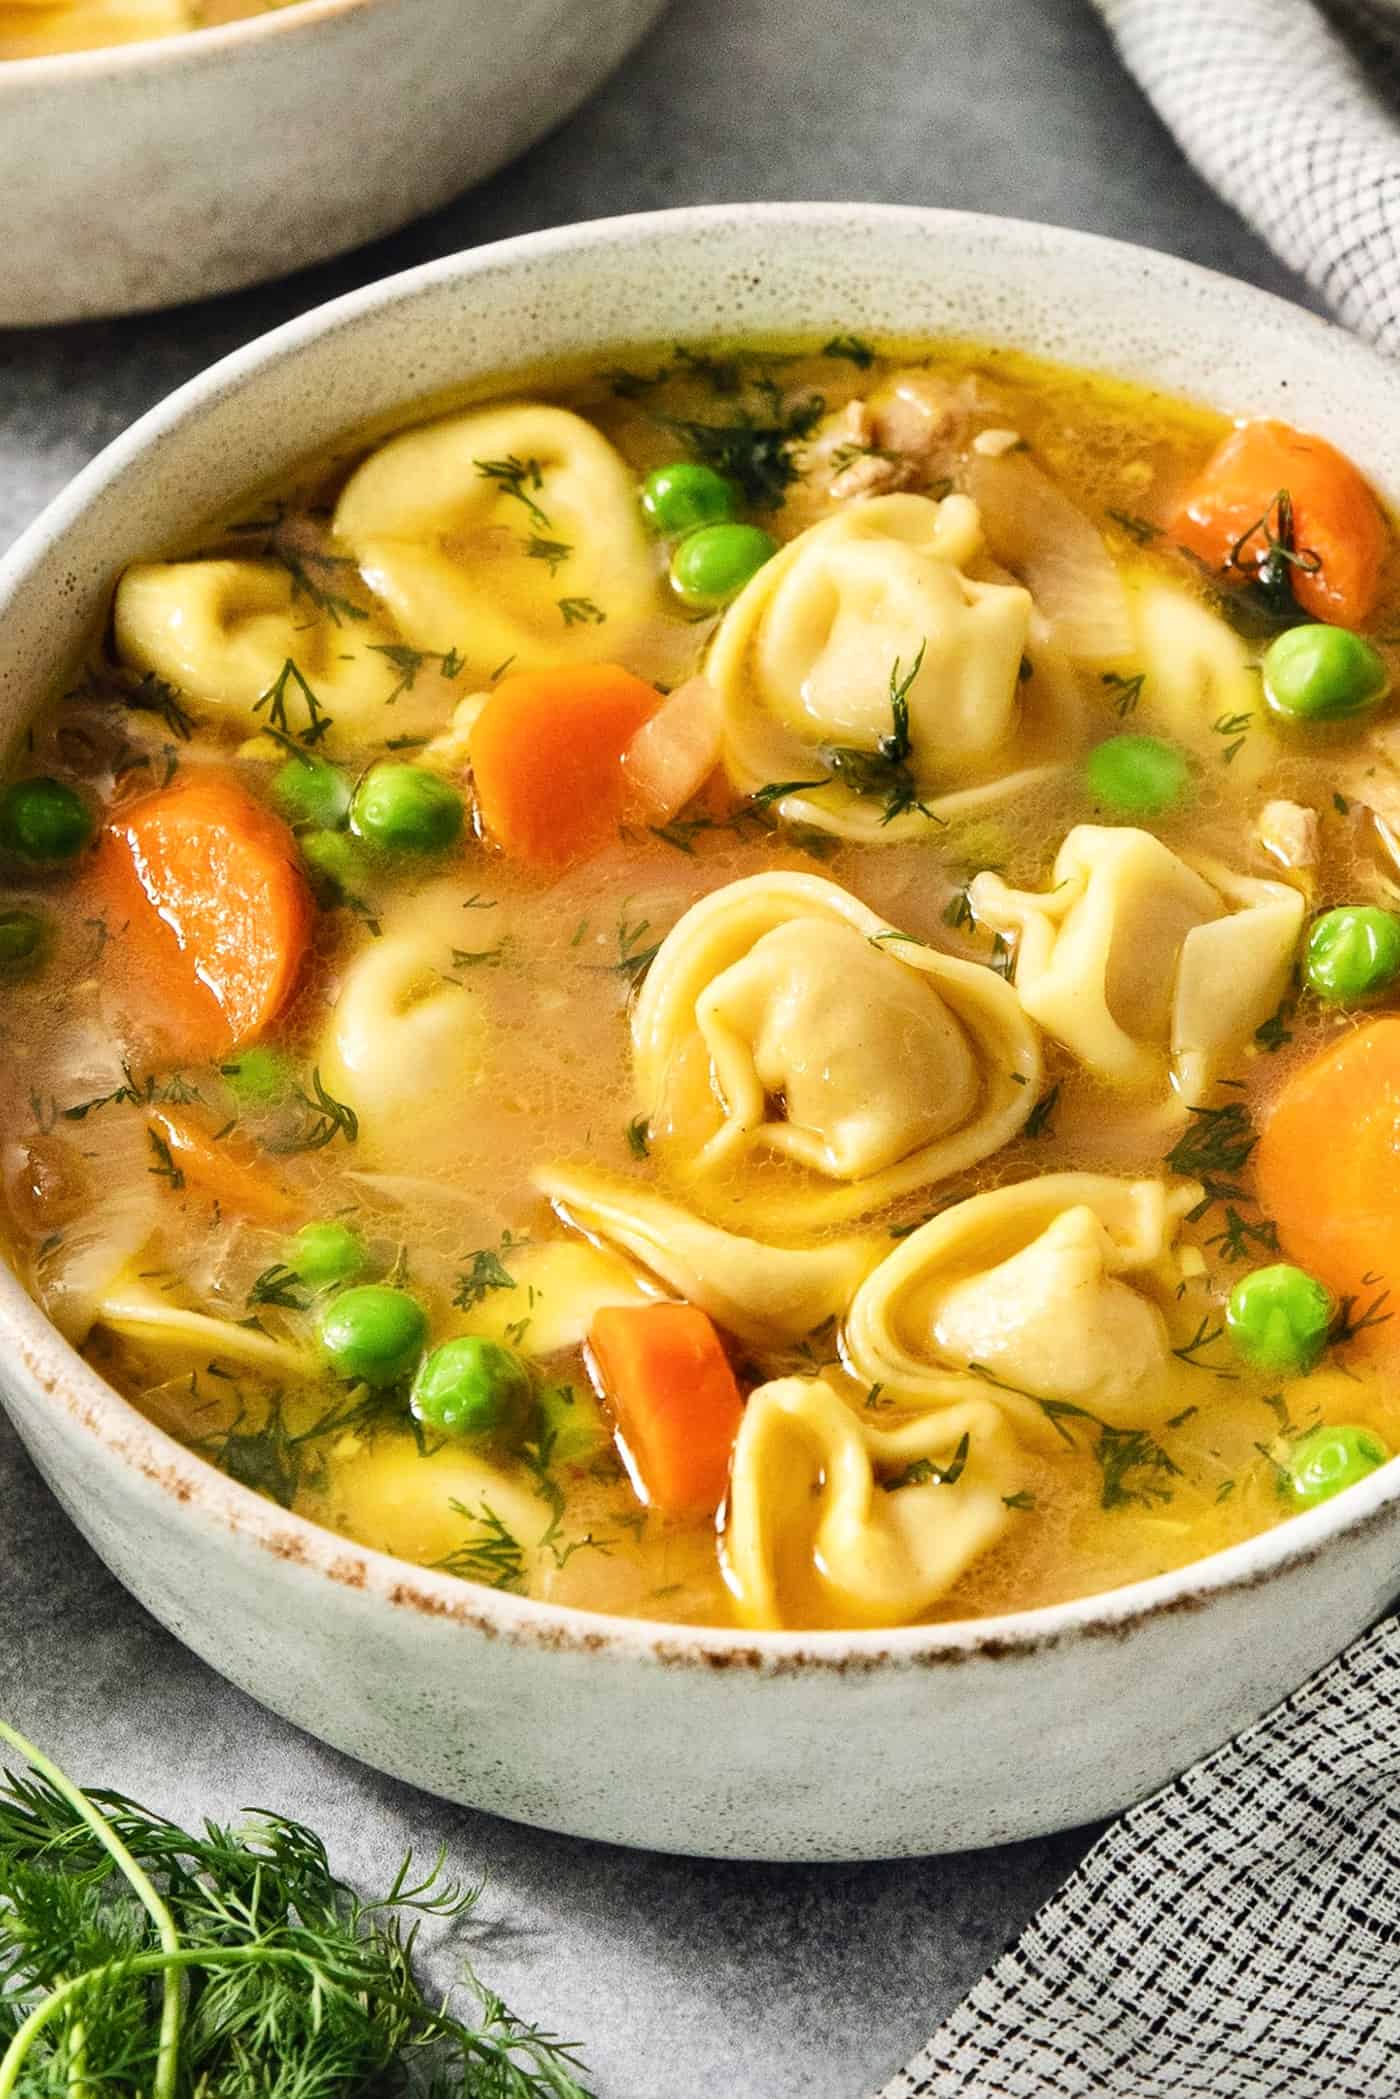 A bowl of lemon chicken tortellini soup showing peas, carrots, and torellini.